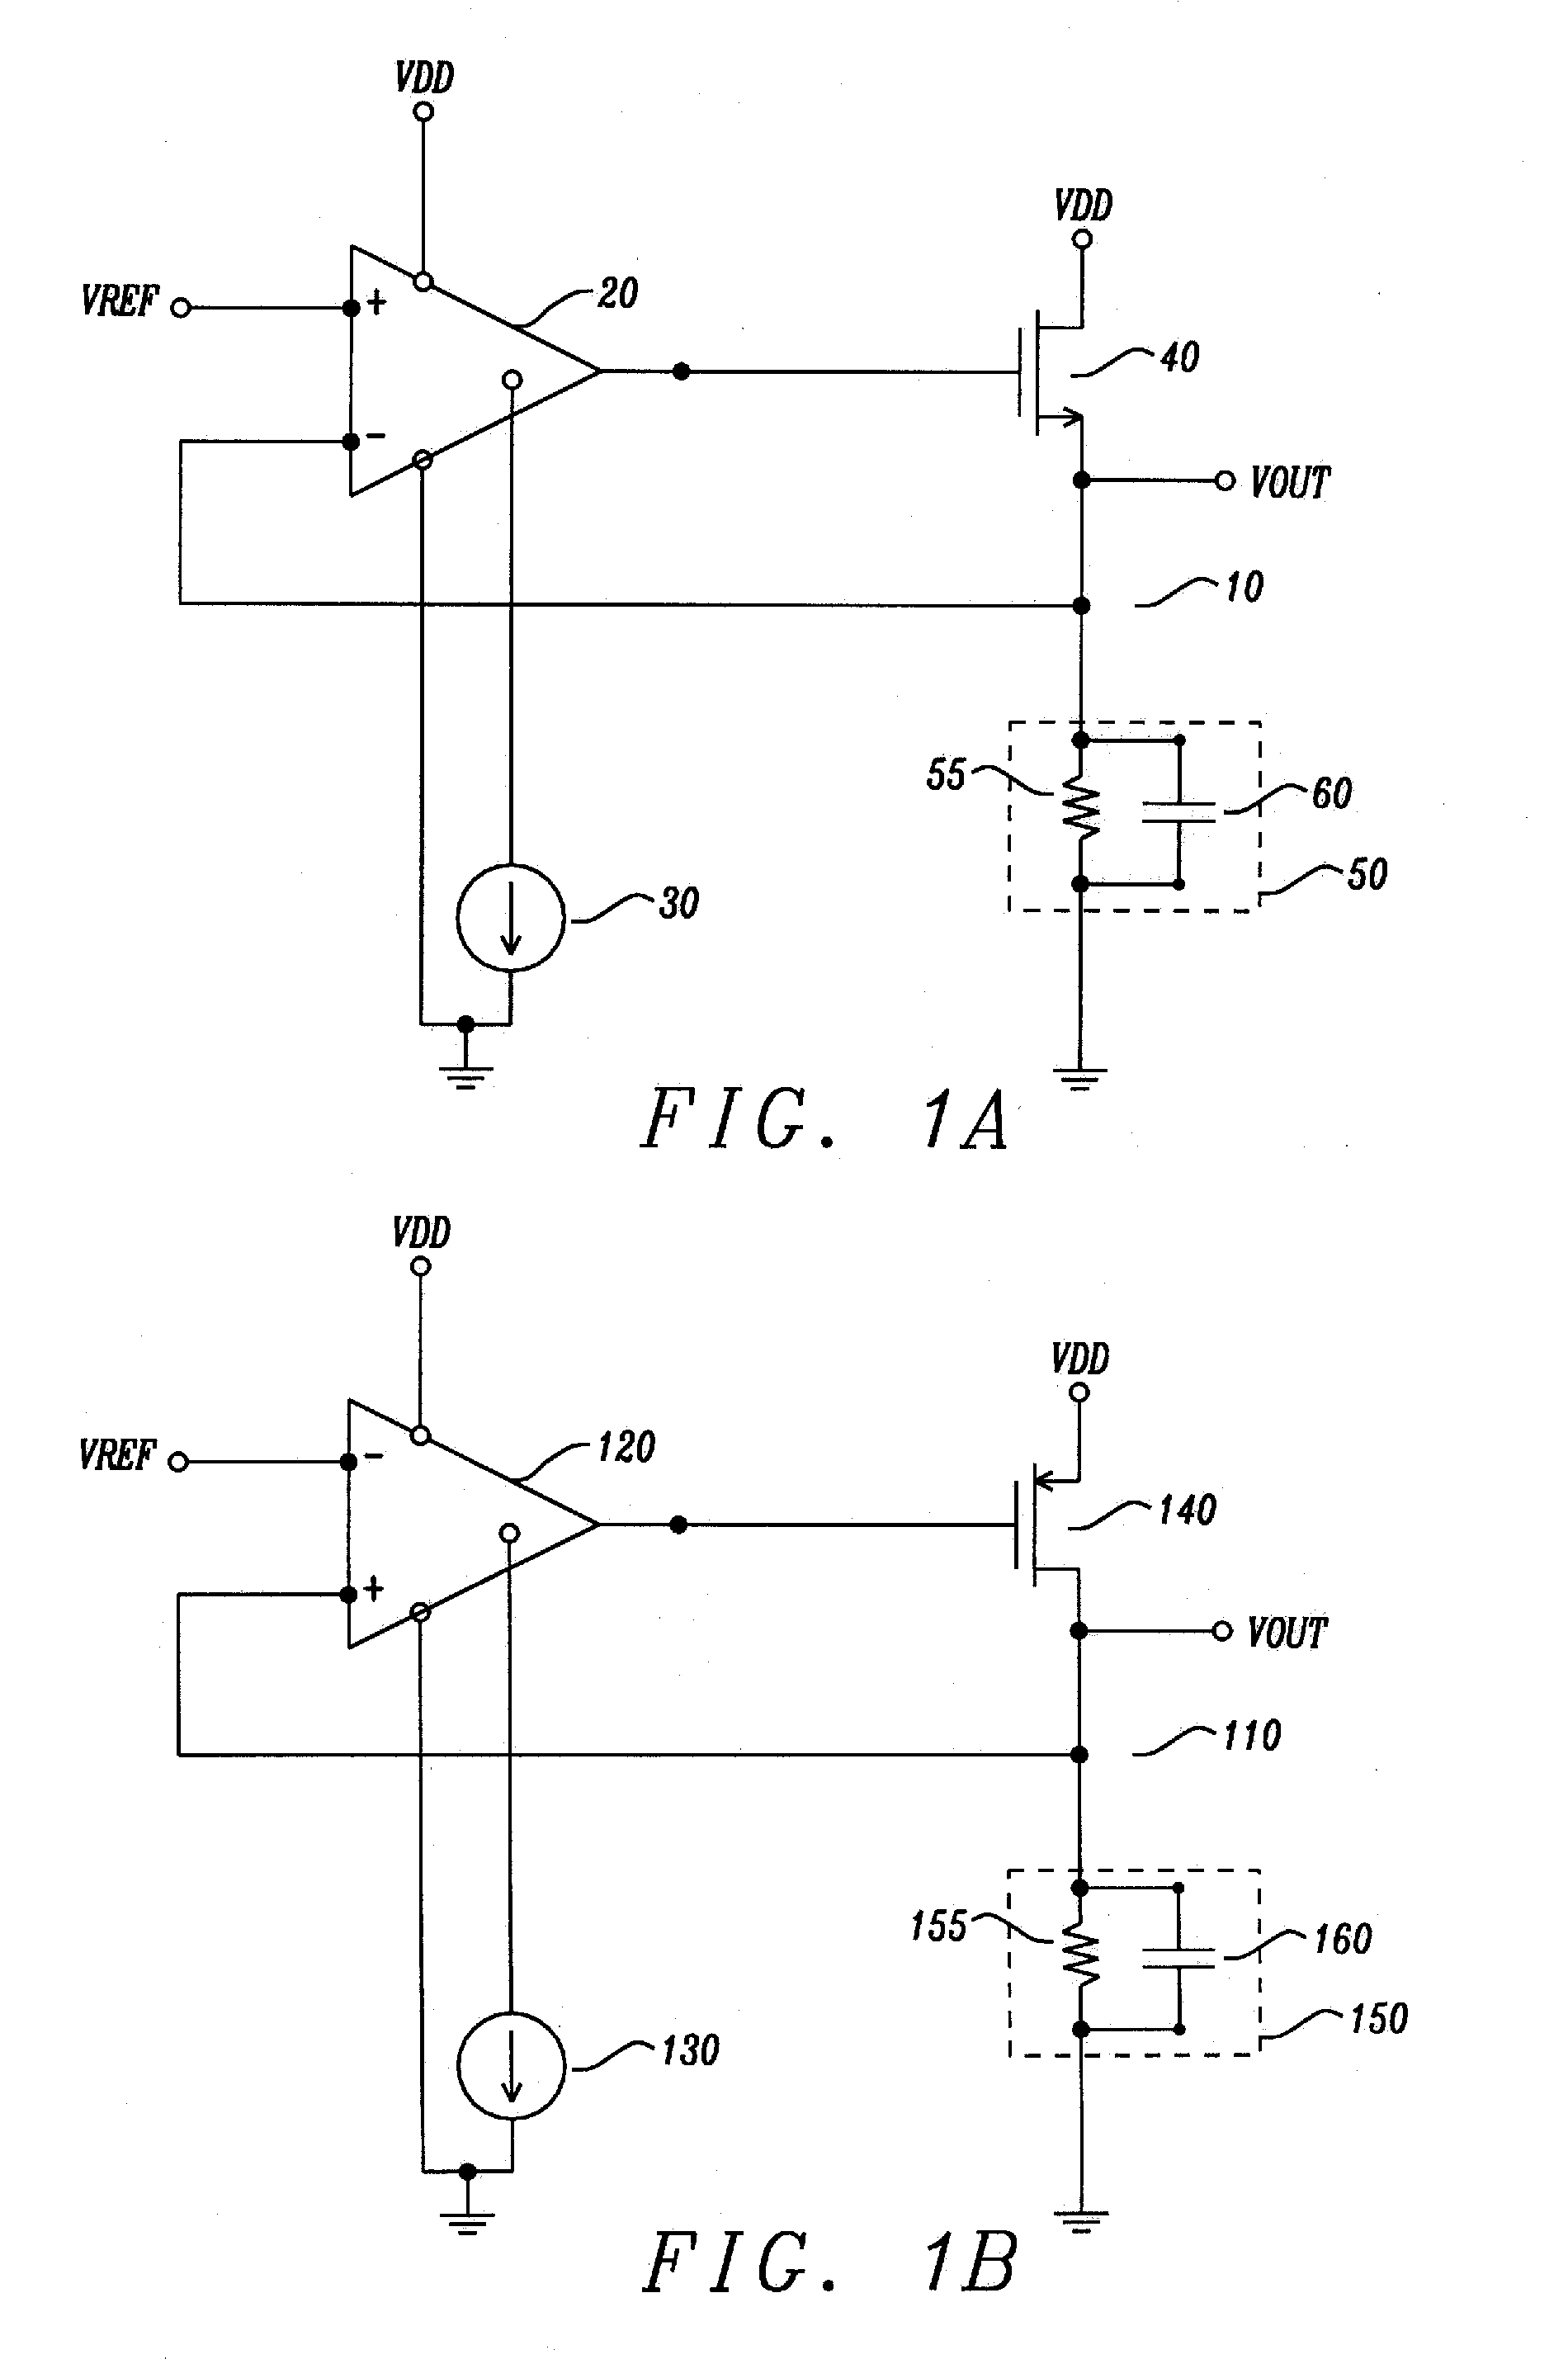 Apparatus and Method for a Voltage Regulator with Improved Output Voltage Regulated Loop Biasing